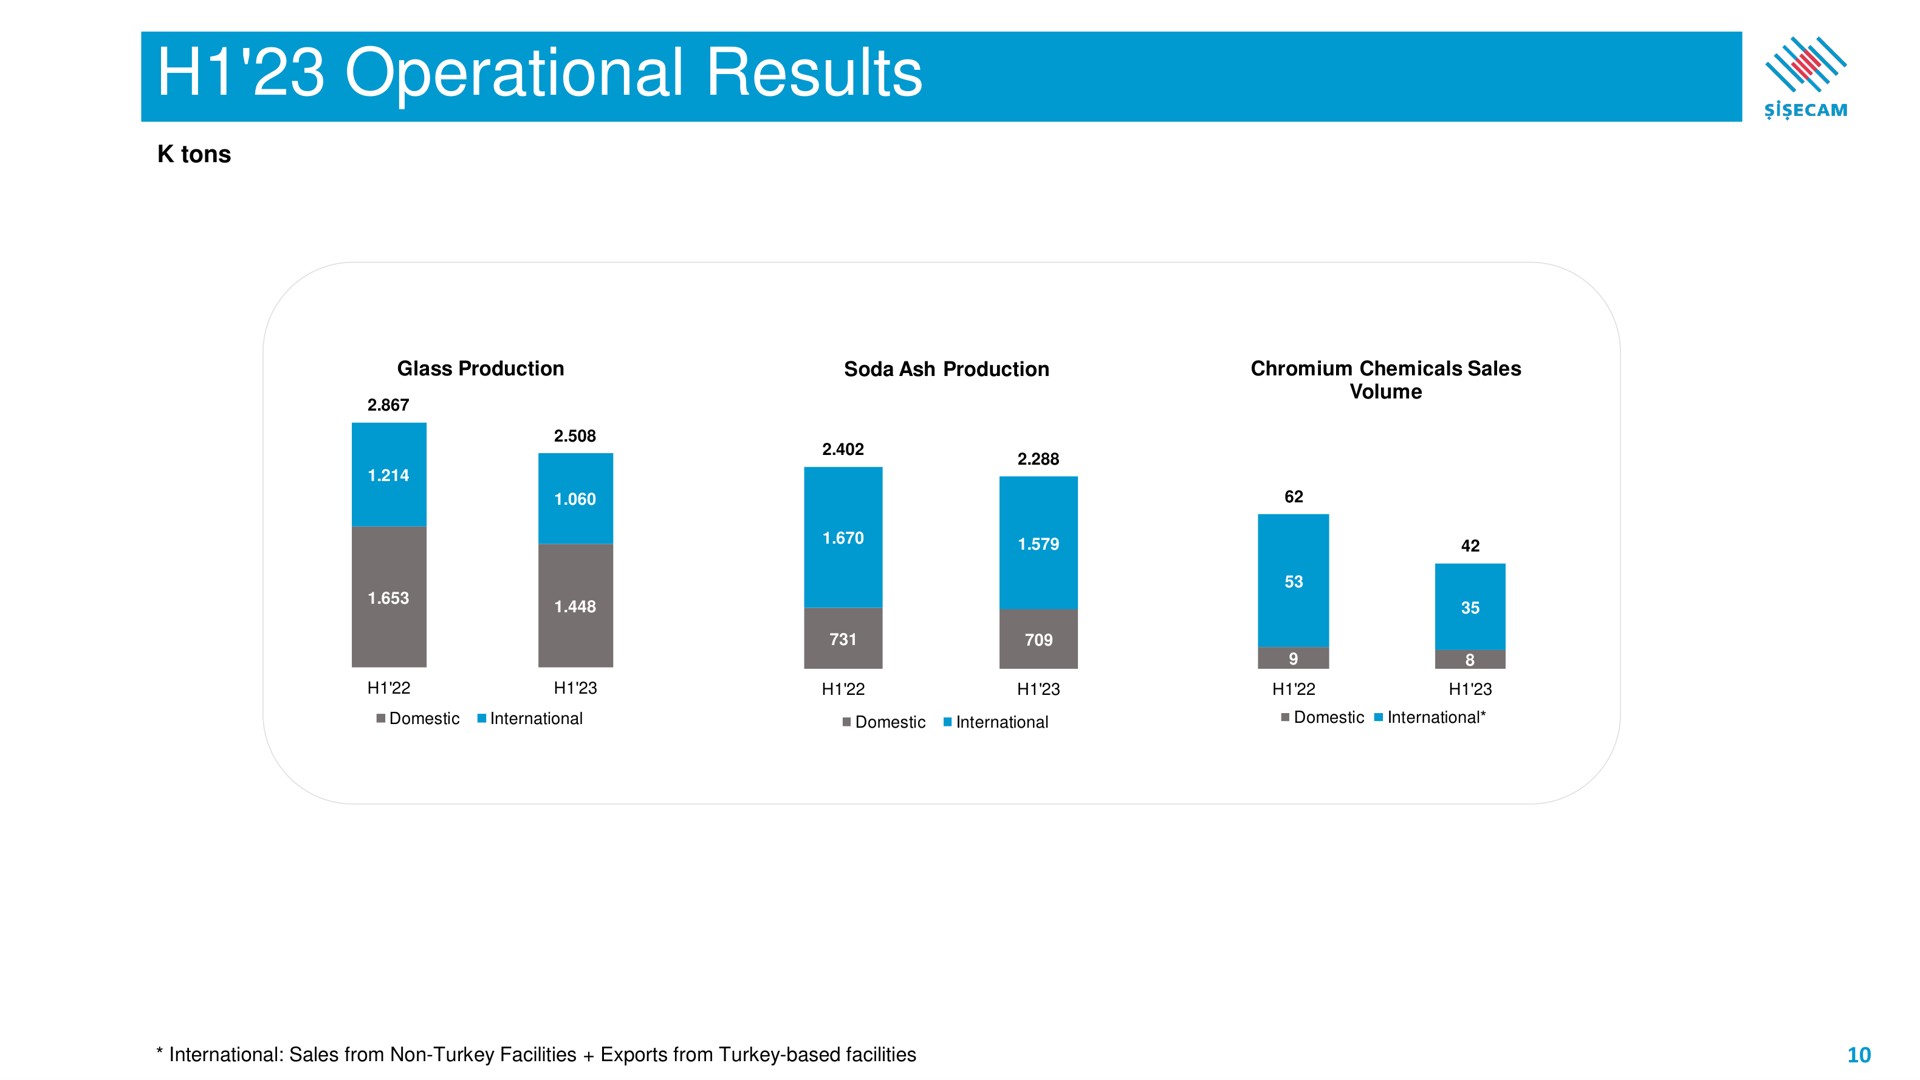 operational results | Sisecam Resources